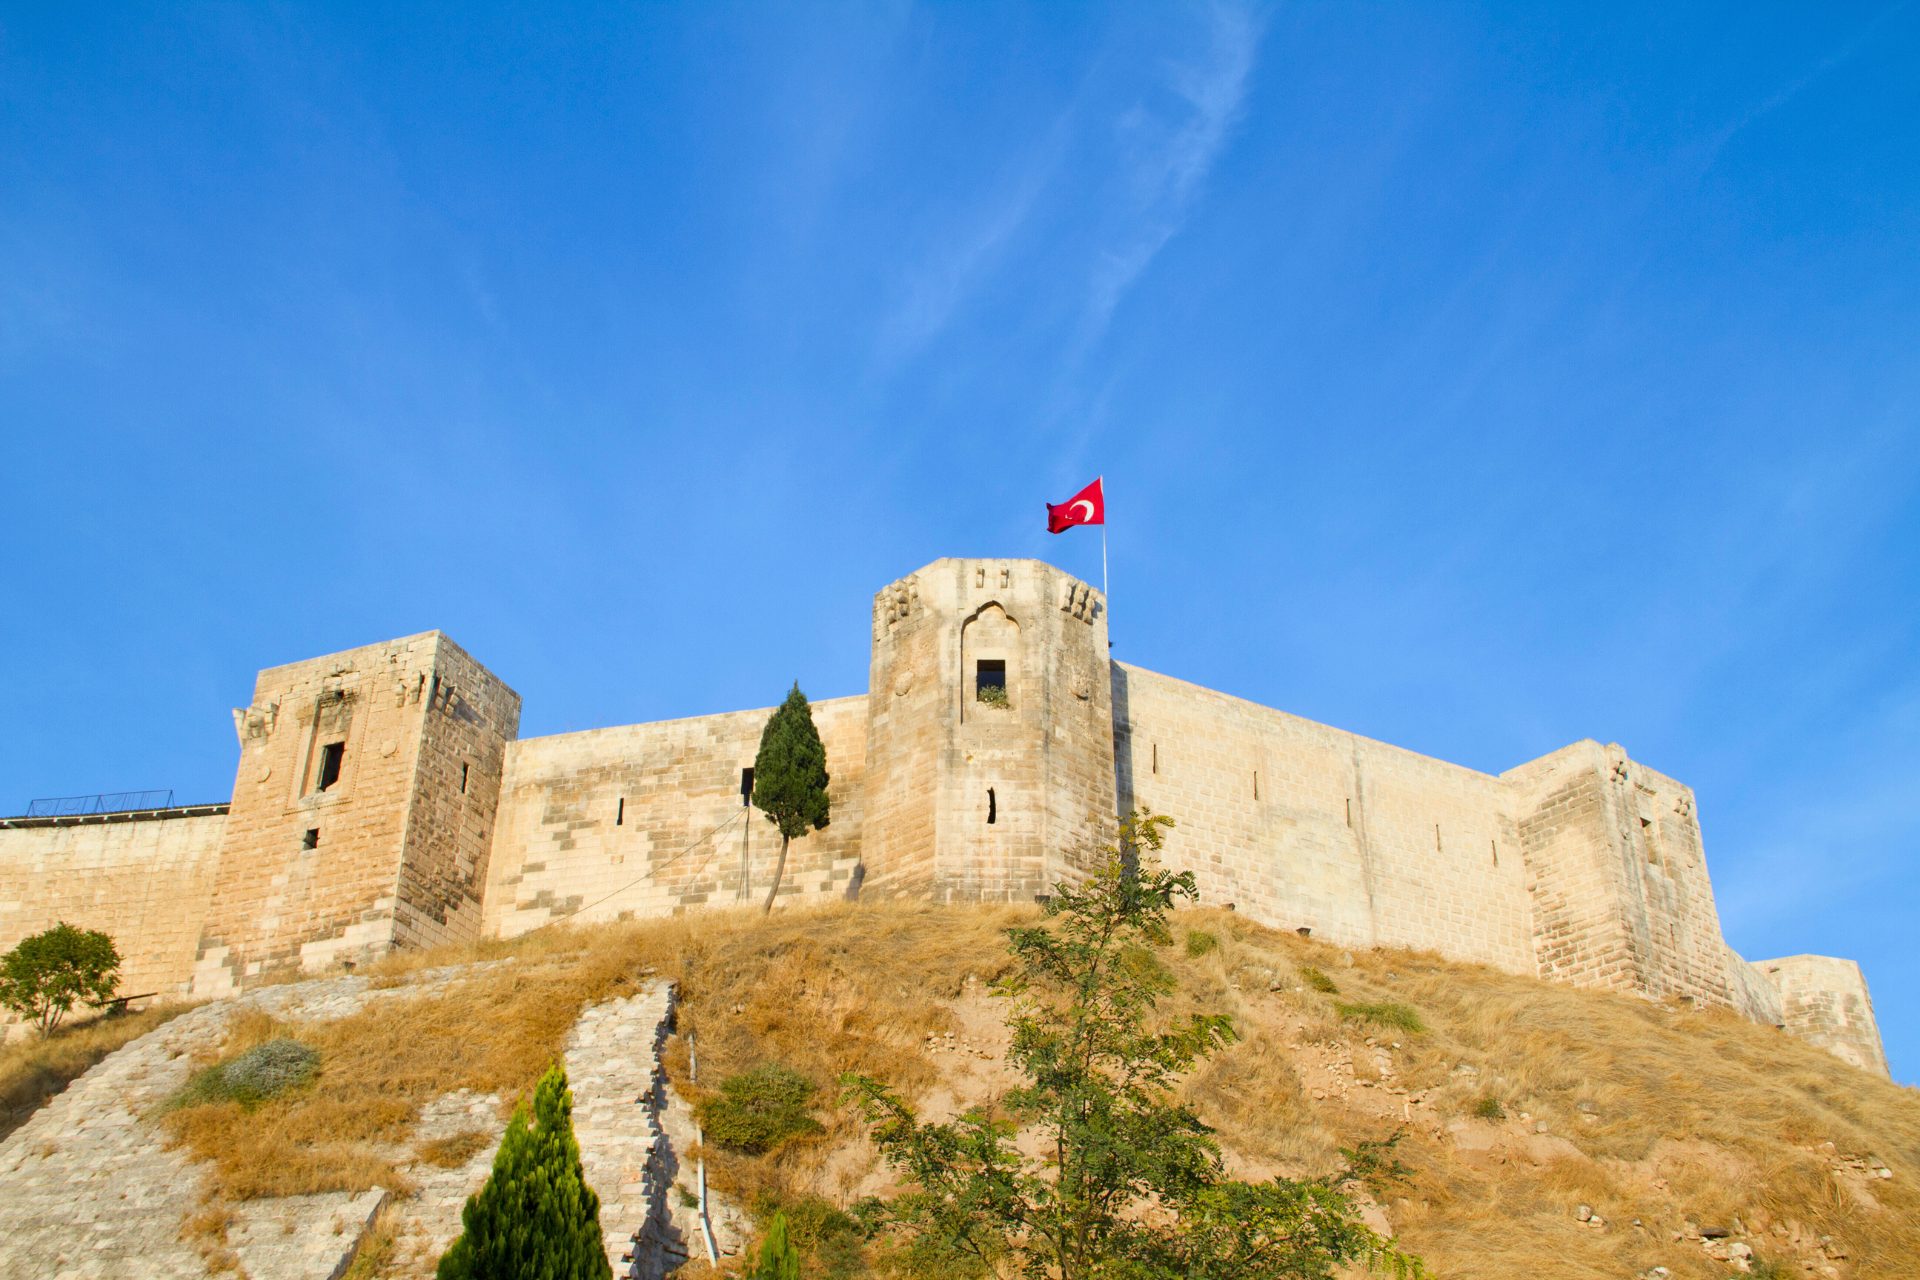 A photograph of the walls of Gaziantep Castle before it was heavily damaged by an earthquake in 2023.